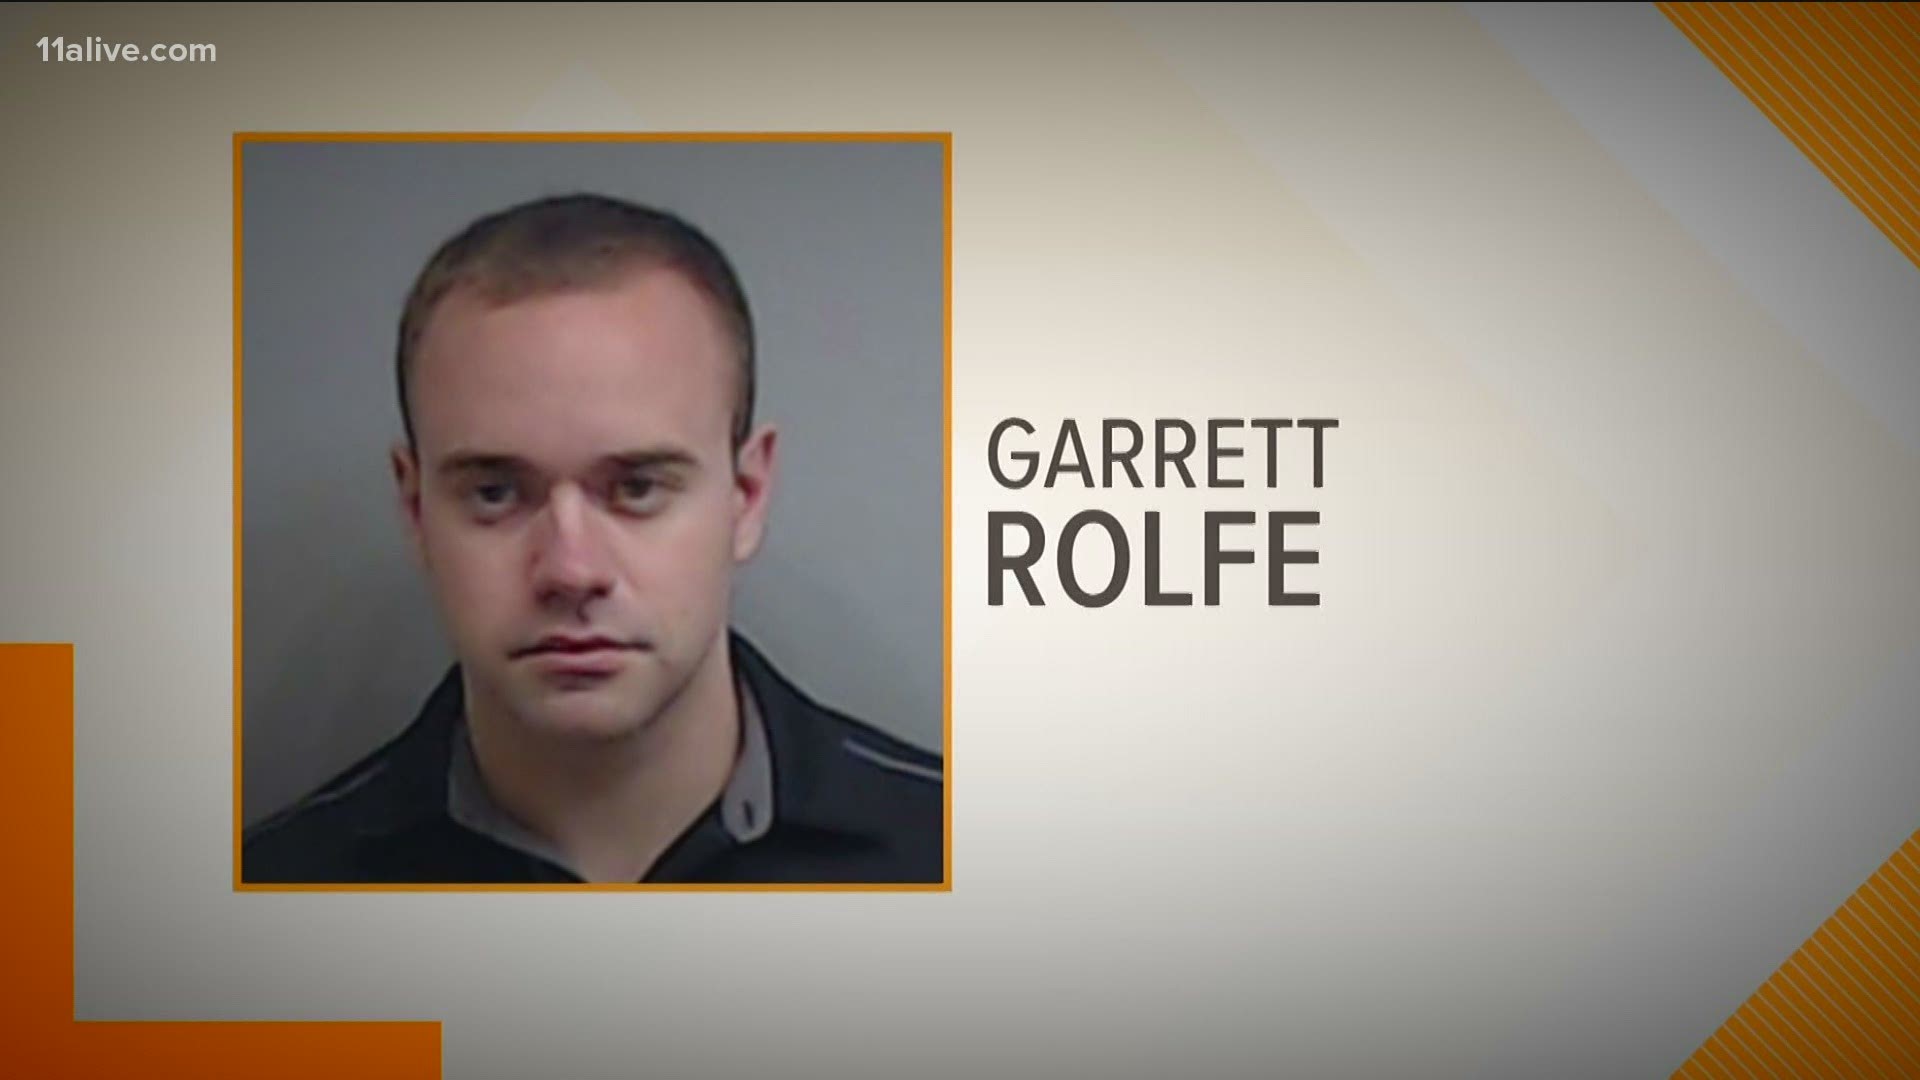 Garrett Rolfe is accused of traveling to Daytona Beach for vacation.